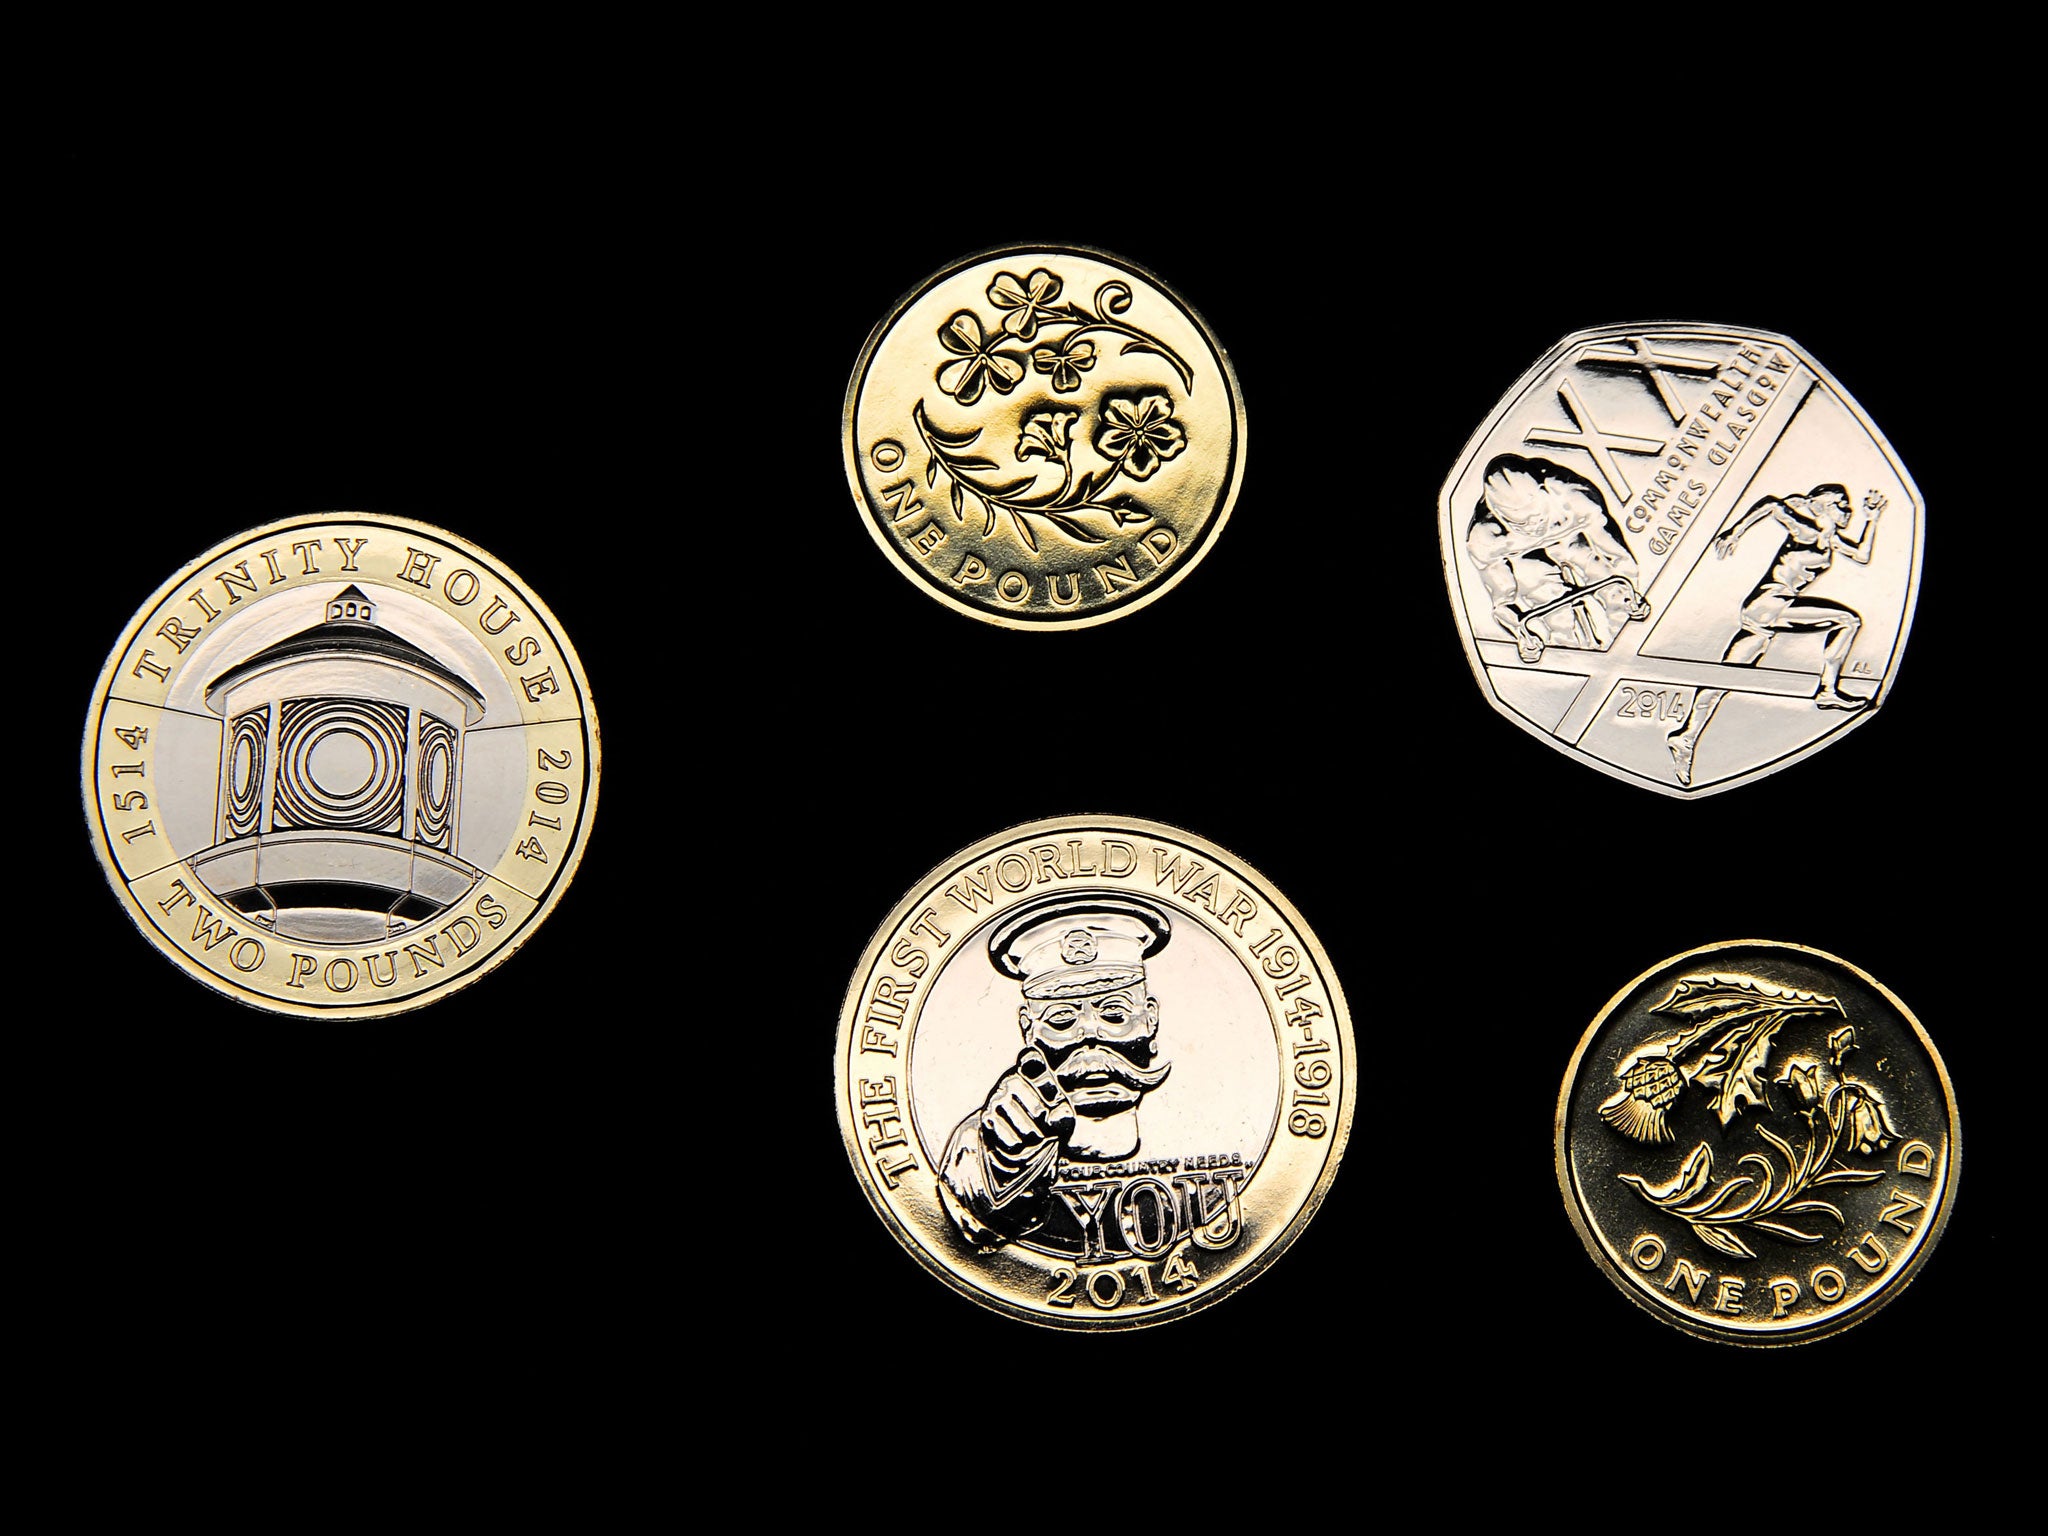 The five new coin designs which will go into circulation on 1st January 2014